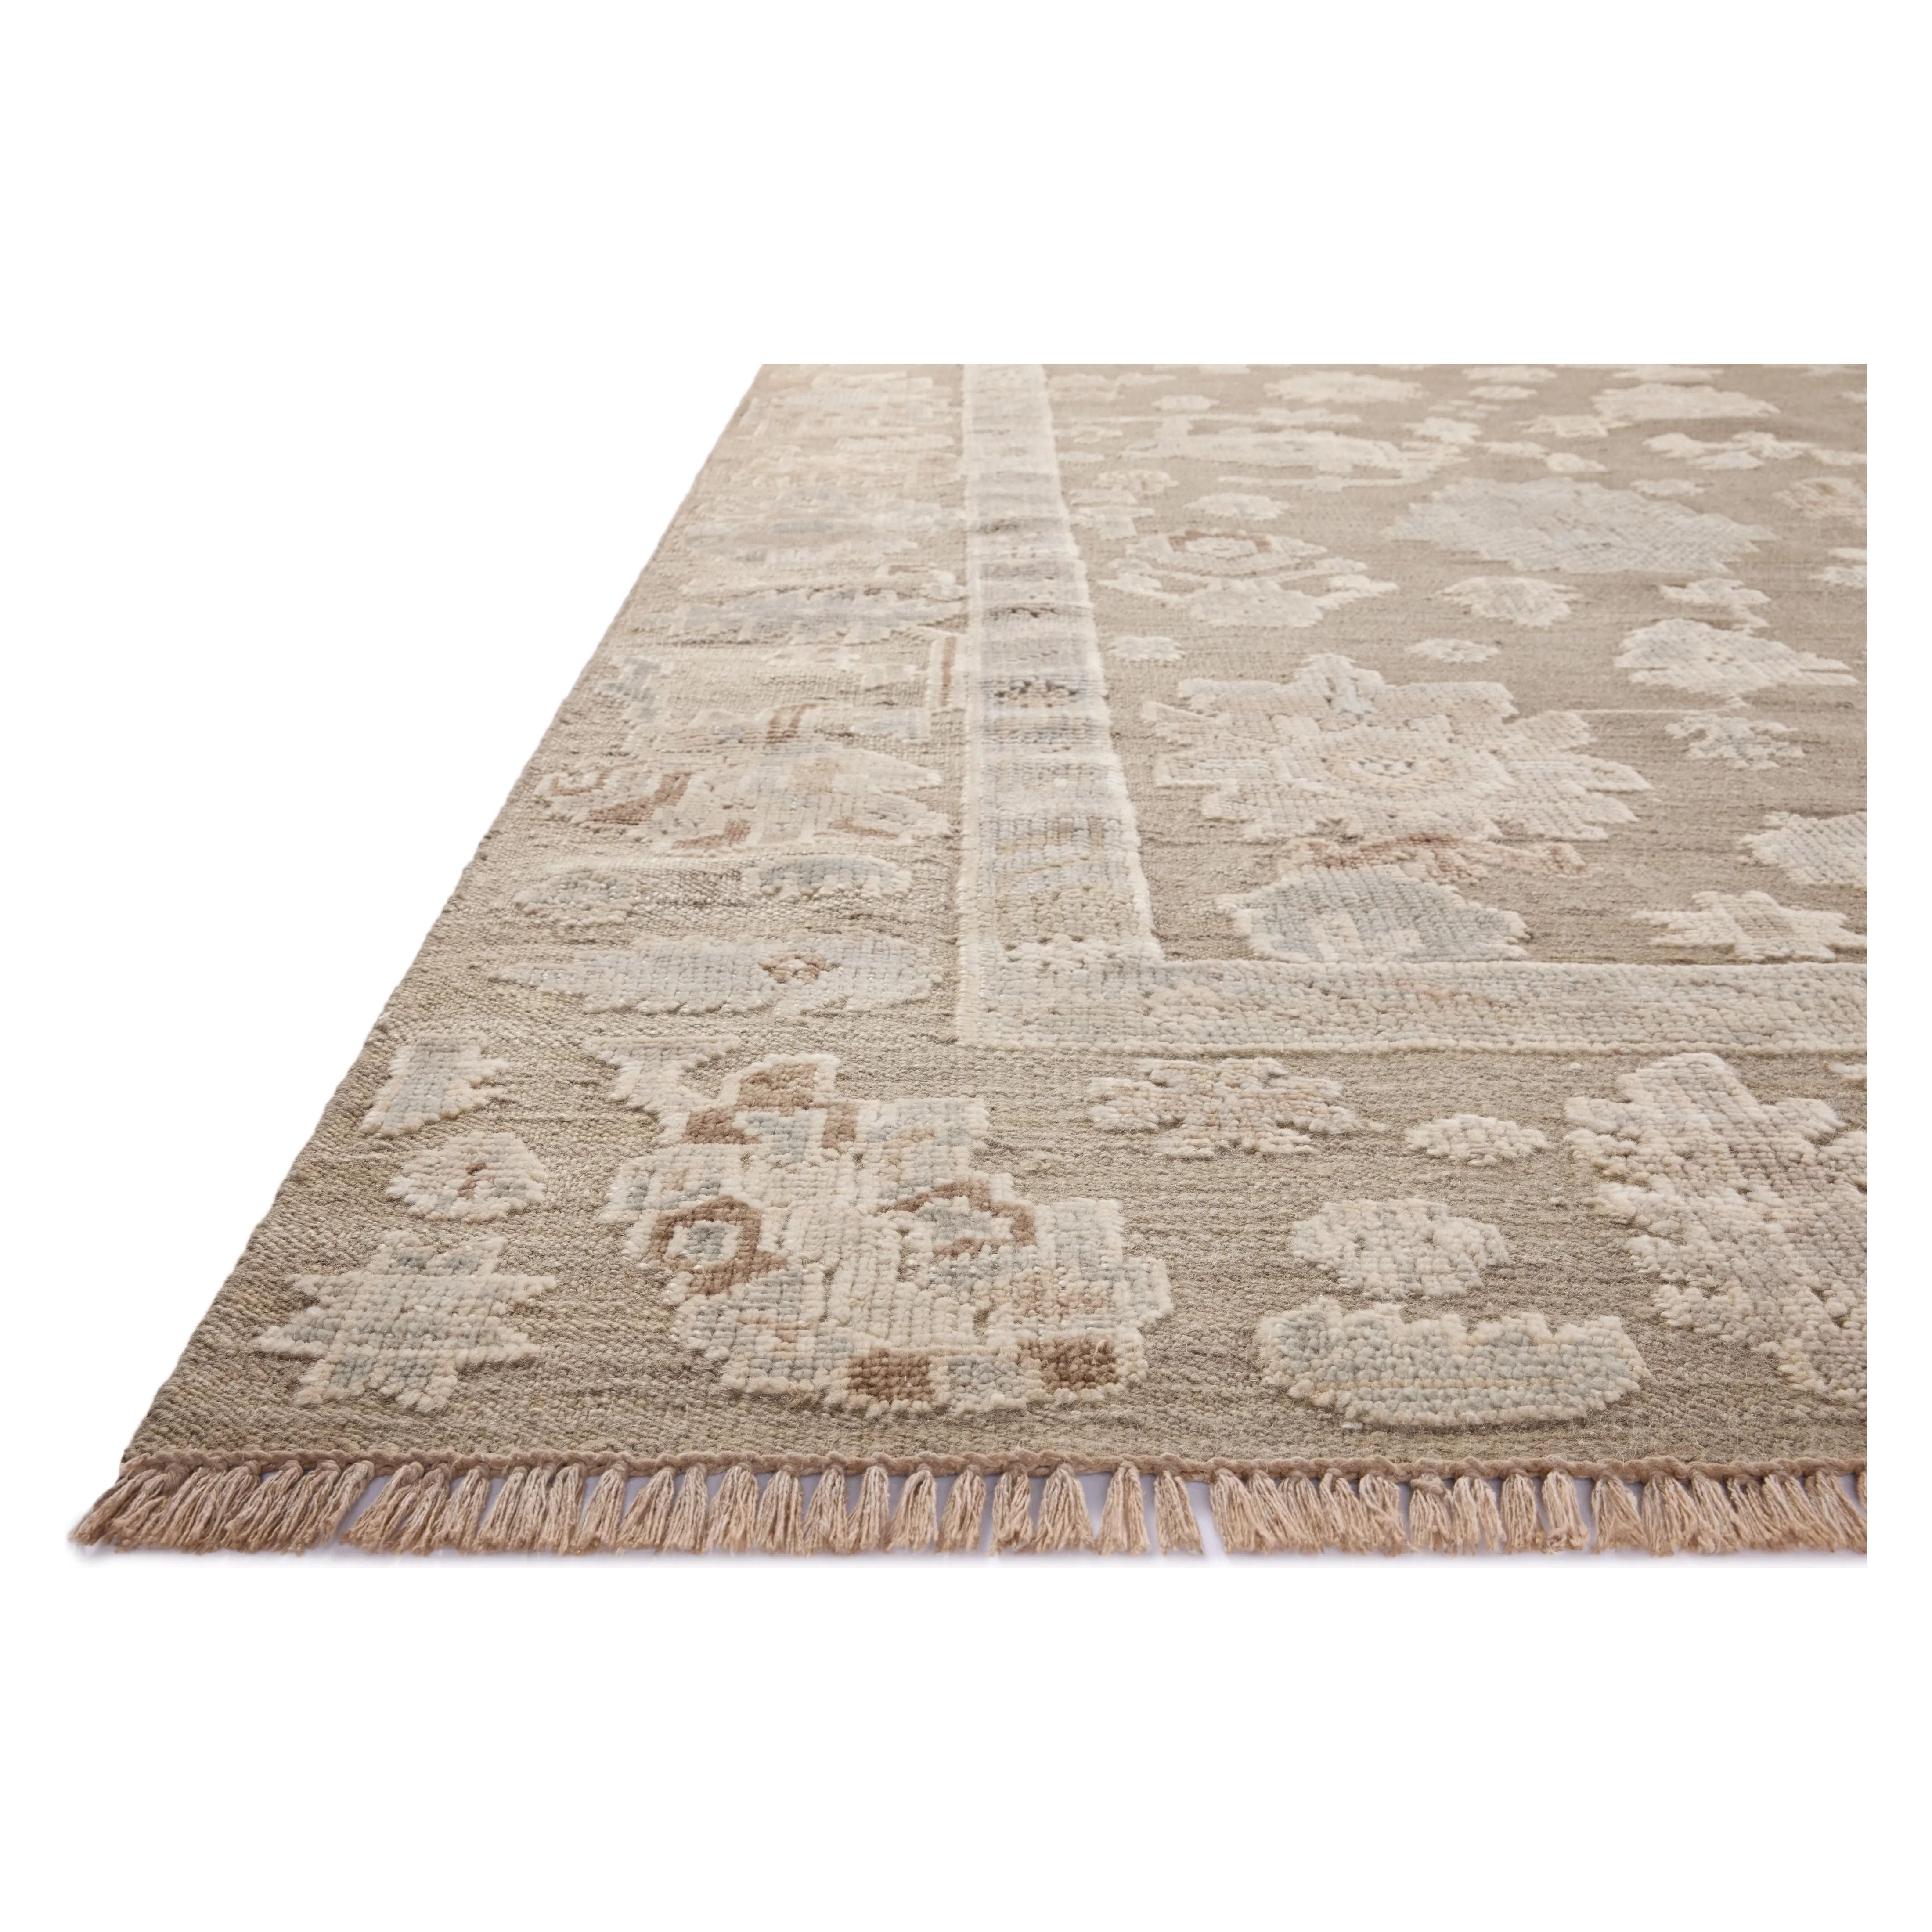 The Marianne Collection is a hand-knotted wool area rug with vintage medallion motifs and short edge fringe, inspired by many one-of-a-kind pieces. The rugâ€™s elegantly neutral palette feels modern, while the rugâ€™s overall aesthetic is timeless. Amethyst Home provides interior design, new home construction design consulting, vintage area rugs, and lighting in the San Diego metro area.